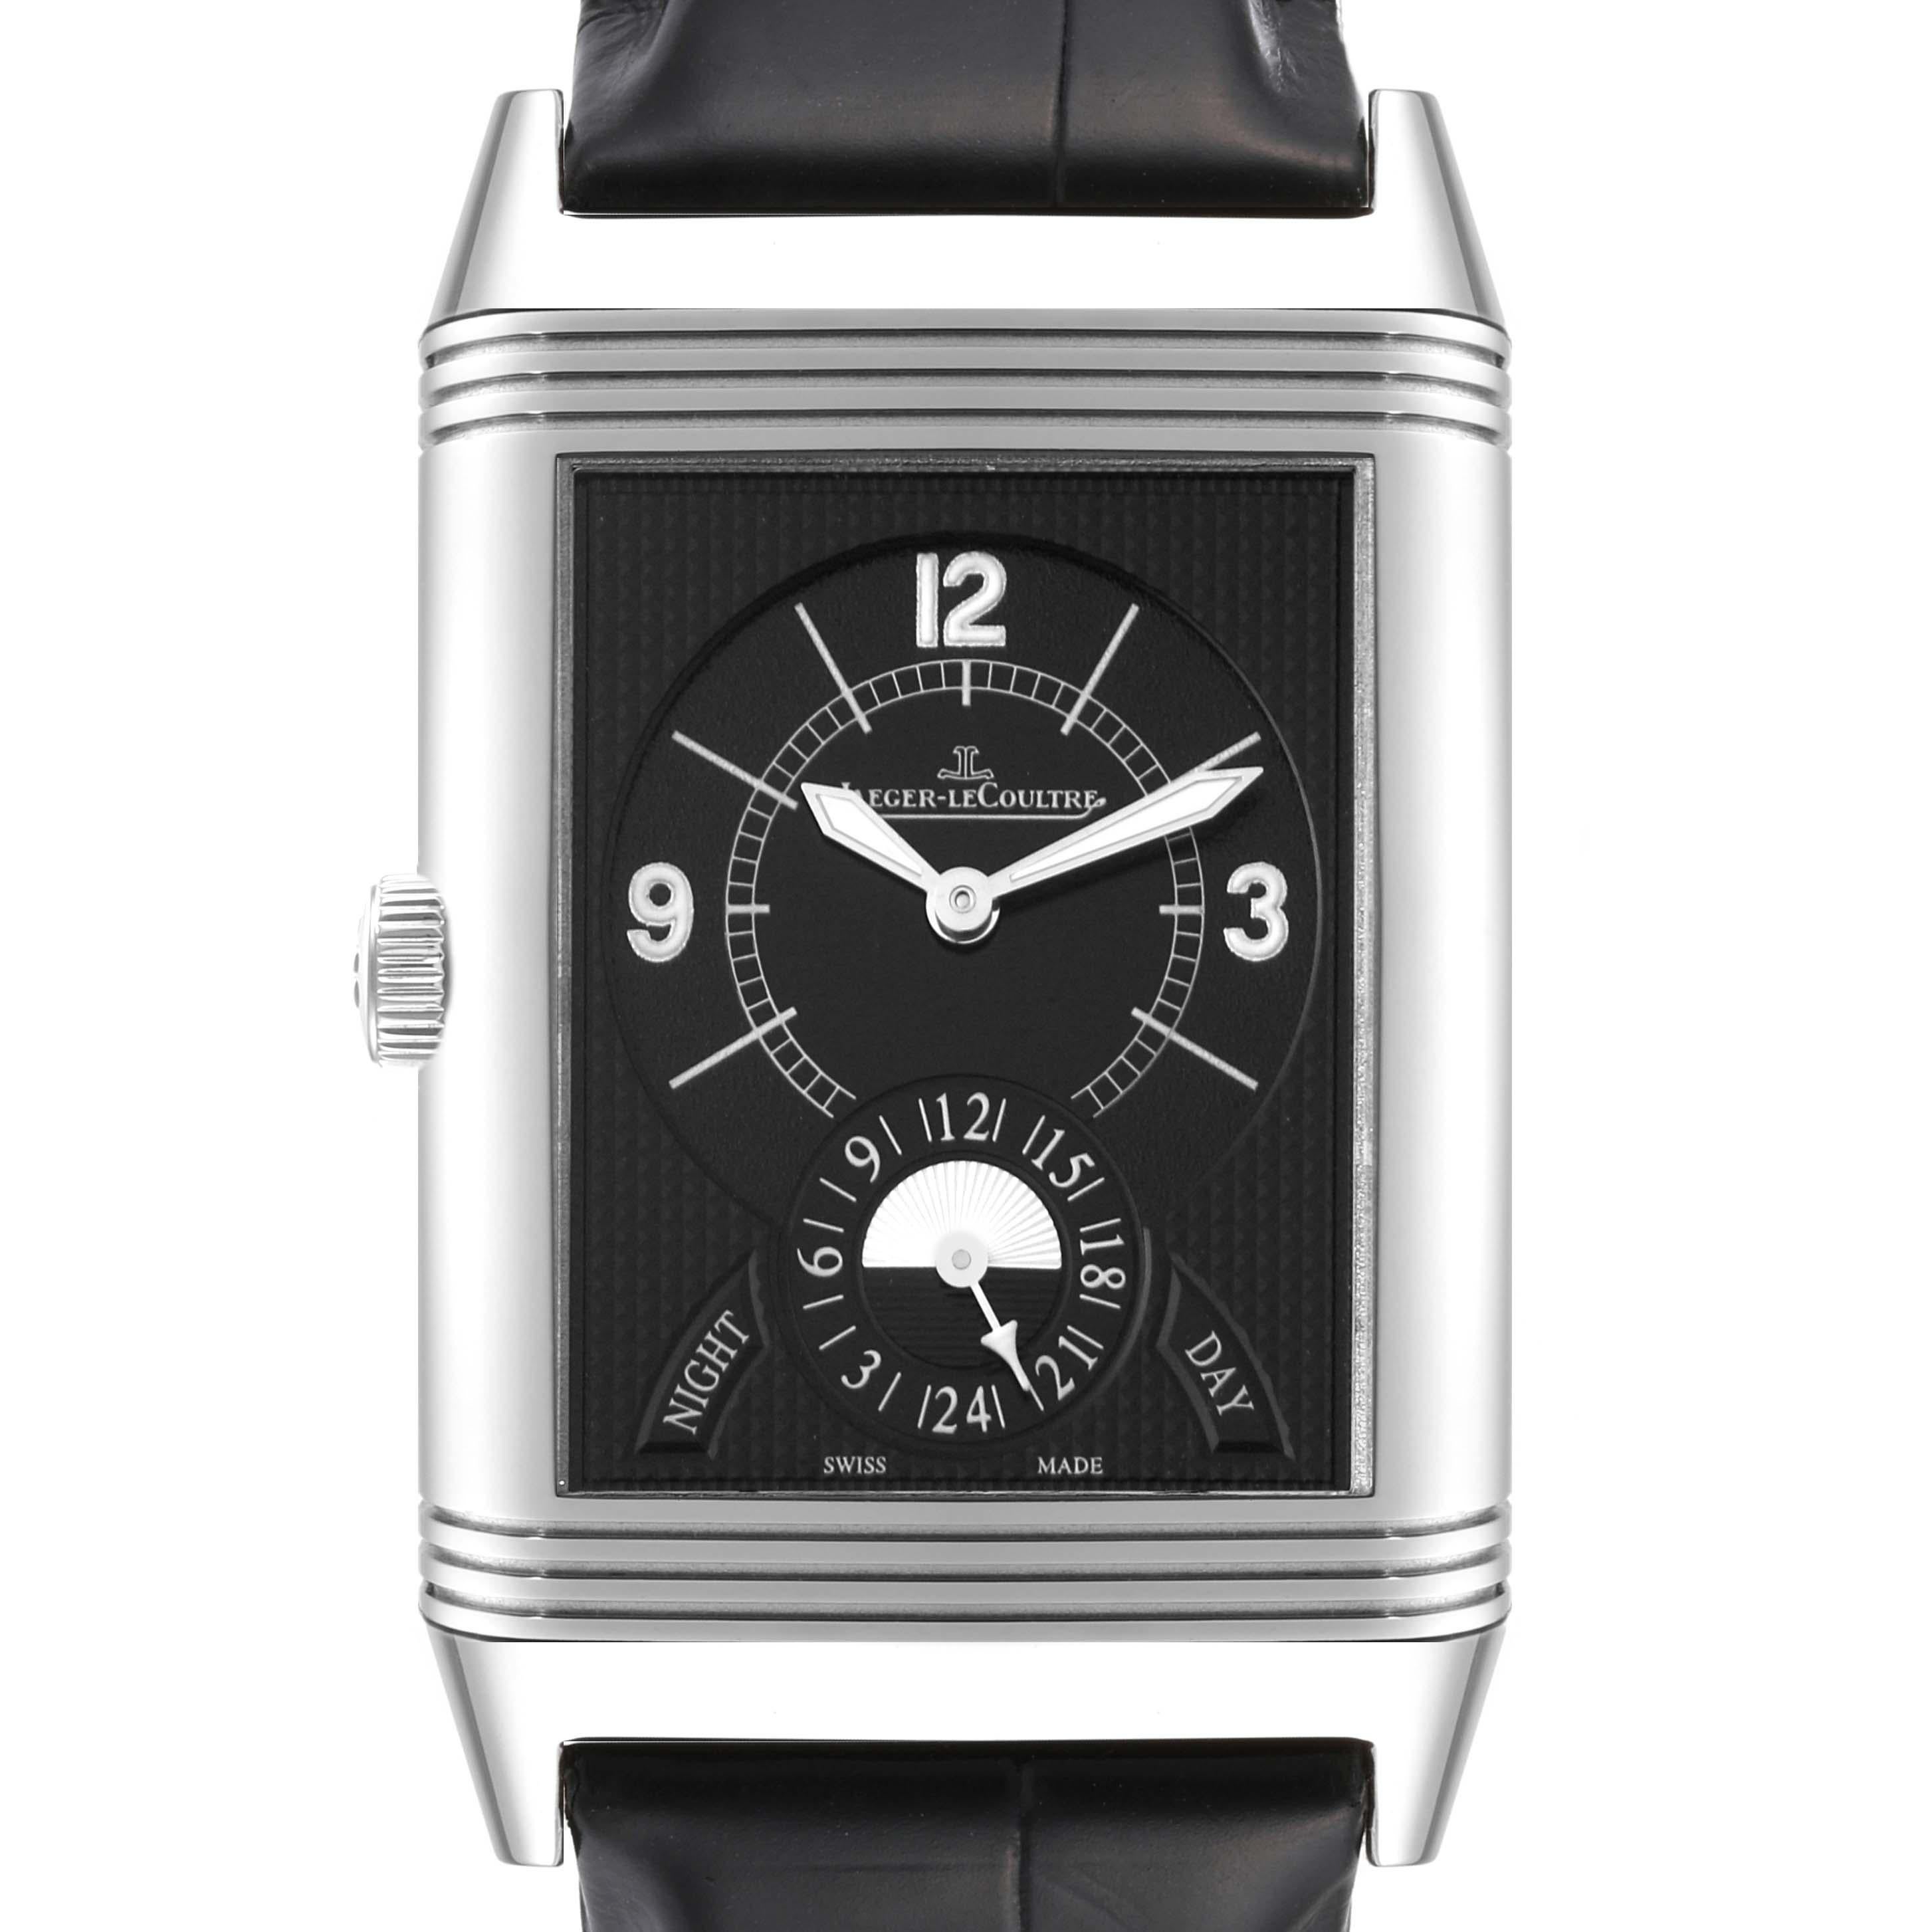 Jaeger LeCoultre Grande Reverso Steel Mens Watch 273.8.85 Q3748421. Manual winding movement. Stainless steel 30.0 x 48.5 mm rectangular case with reeded ends rotating within its back plate. Stainless steel bezel. Scratch resistant sapphire crystal.